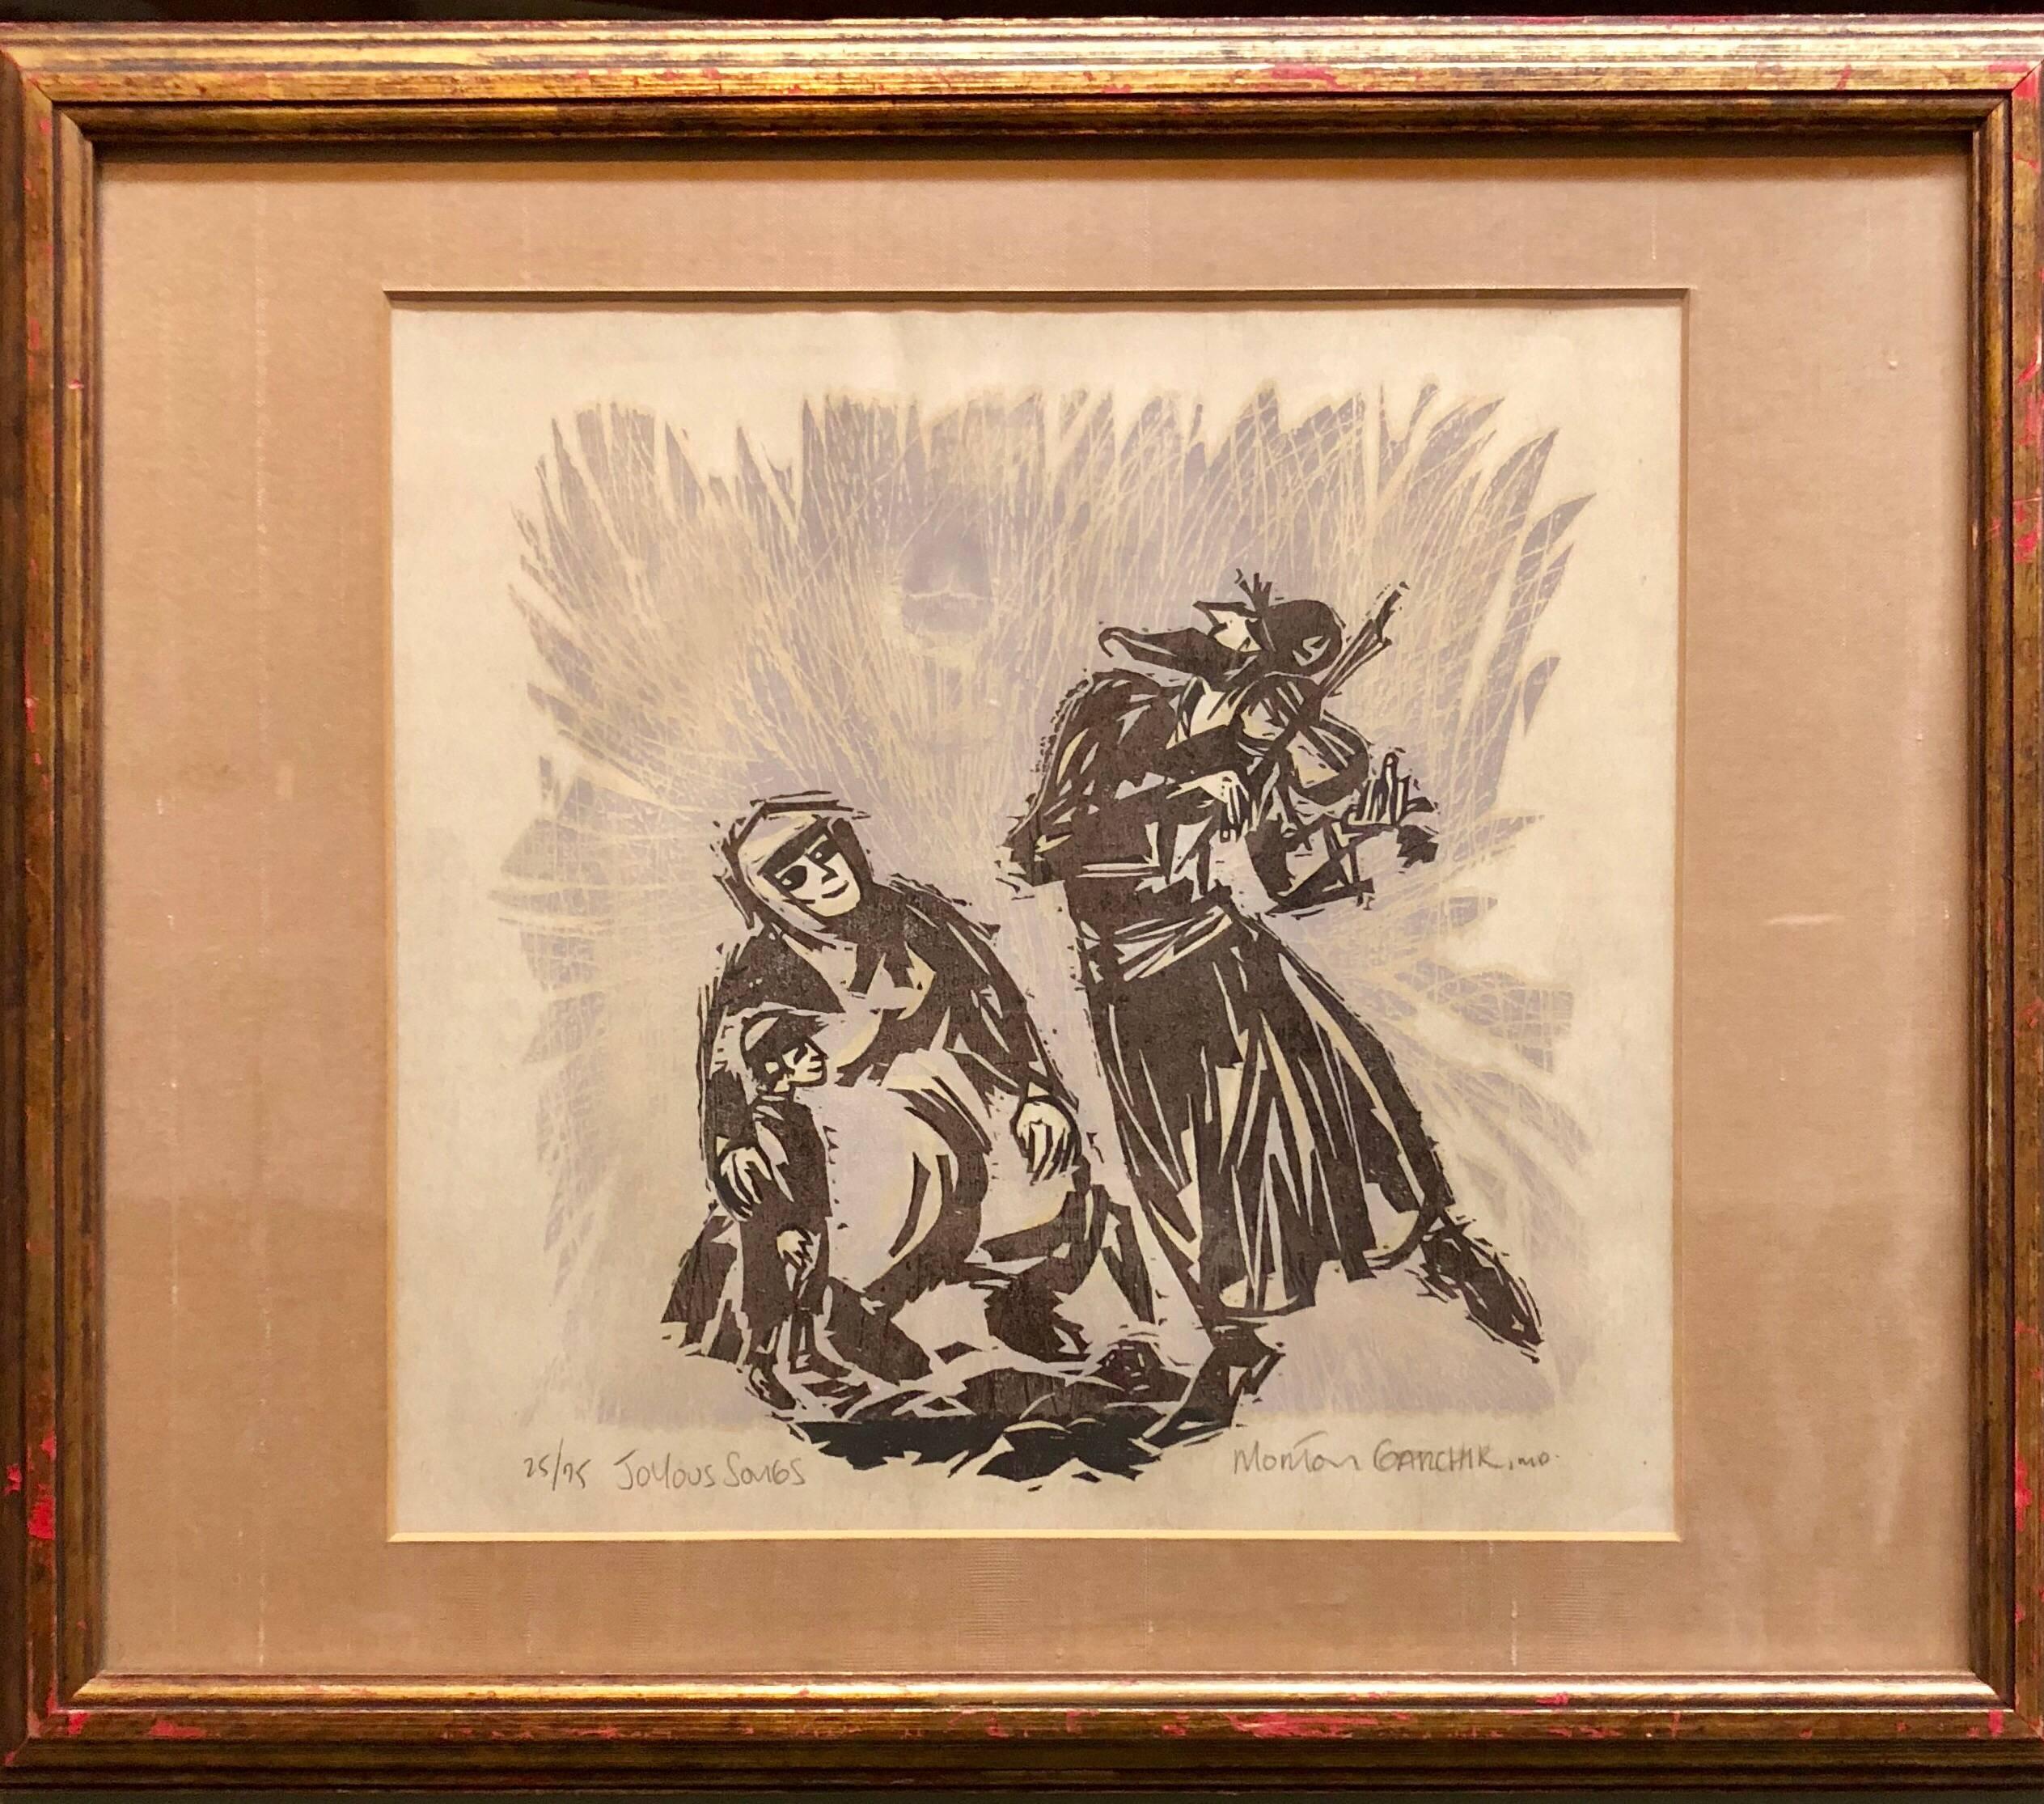 Original pencil signed Judaic woodcut on mulberry paper.
MORTON GARCHIK  (1929-2009)  Jewish American artist painter, printmaker, illustrator, woodcut artist and author. Garchik was educated at the Art School of the Brooklyn Museum and the School of